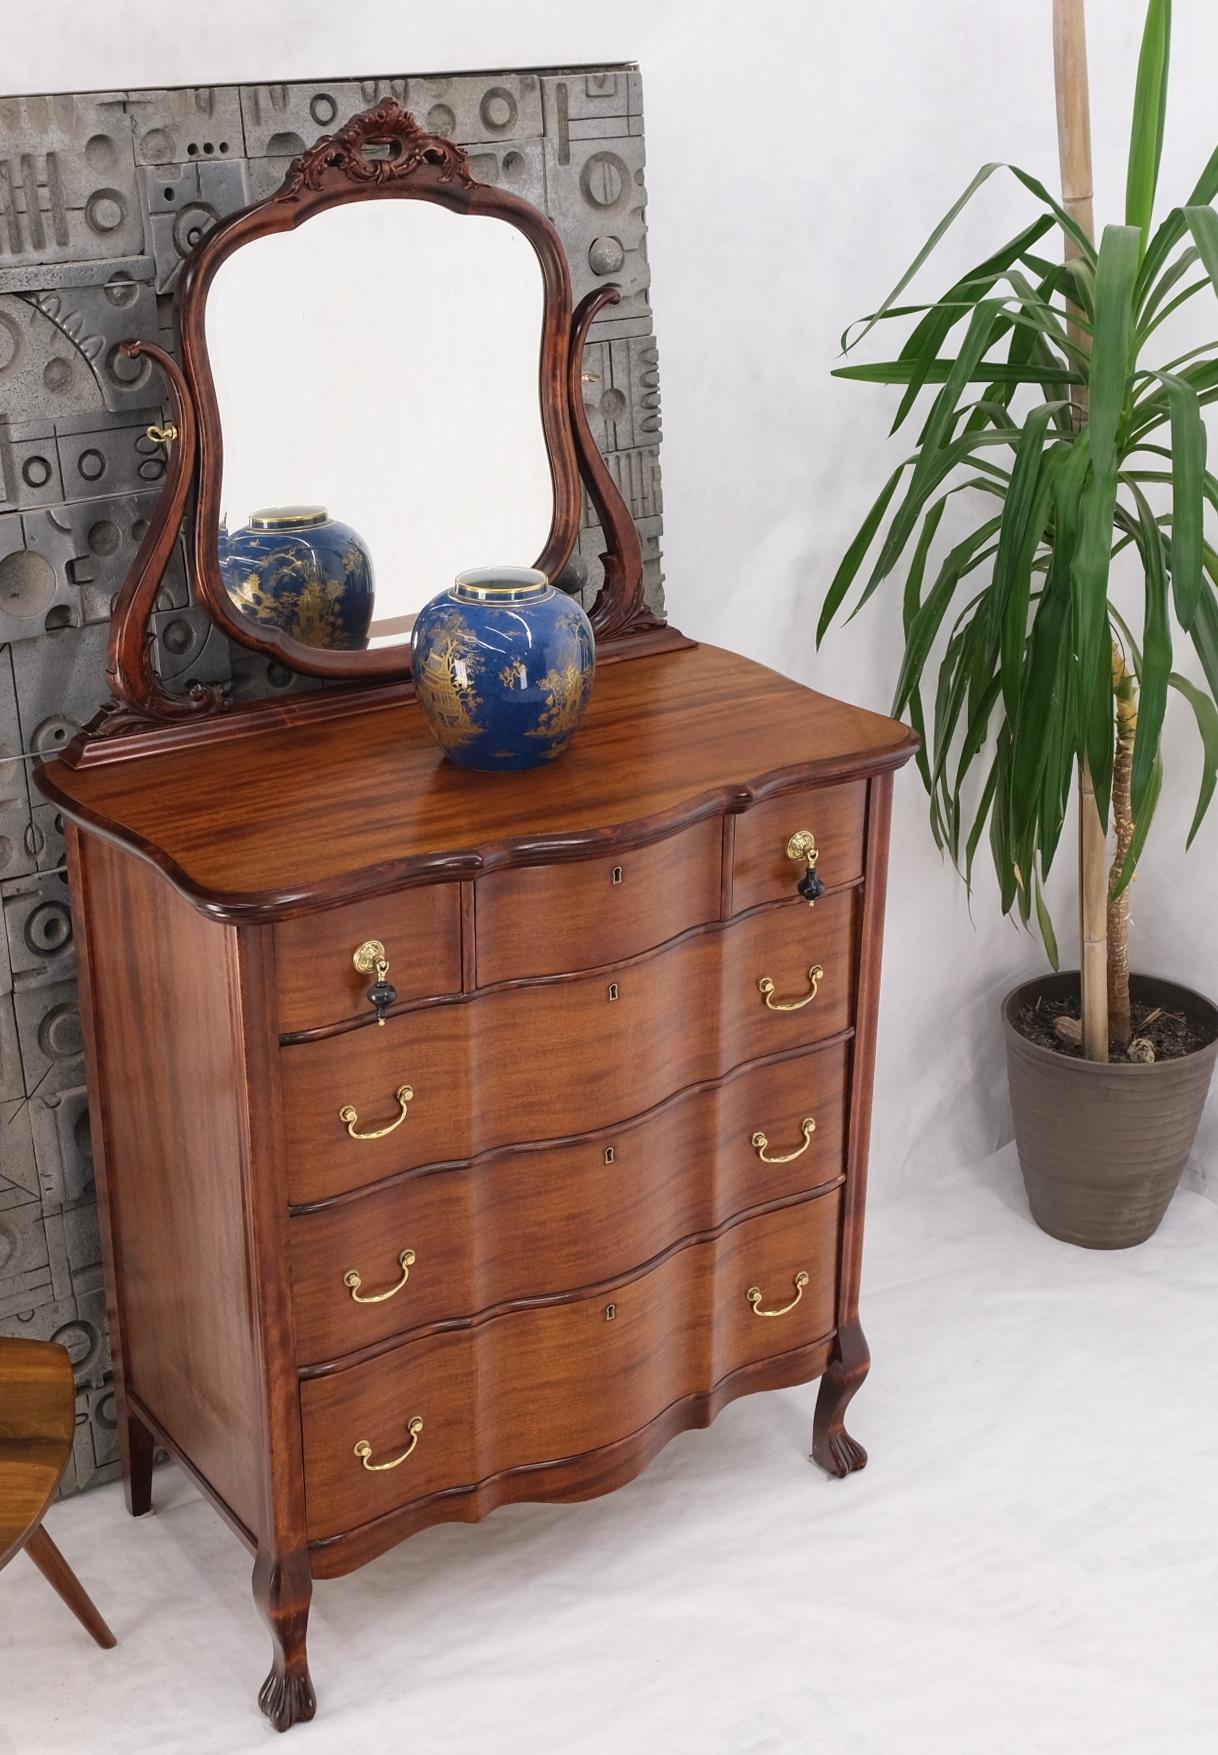 Serpentine Front 4 Drawers Swivel Mirror Mahogany Dresser High Chest Ball Claw 5